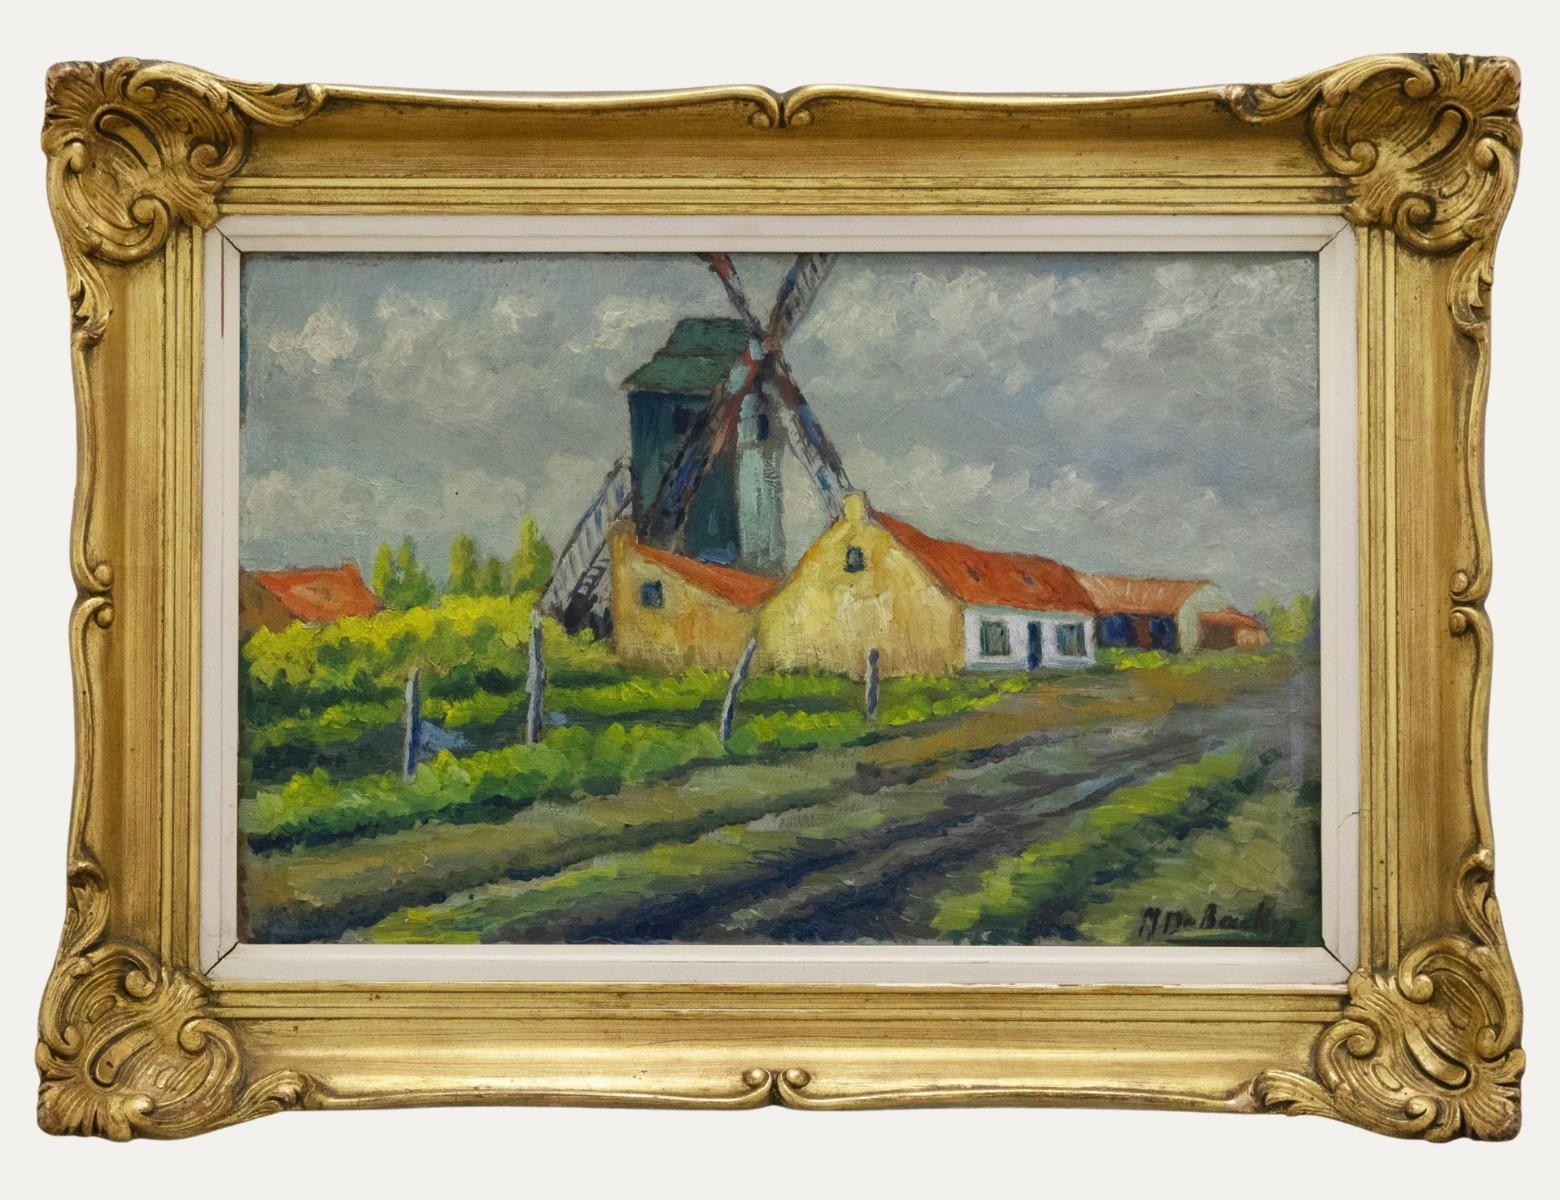 A colourful depiction of a small Dutch farmstead with a windmill and outbuildings. The artist captures the scene in an impressionist style with gestural brushwork and an expressive palette. Presented in a substantial swept gilt frame. On board.
